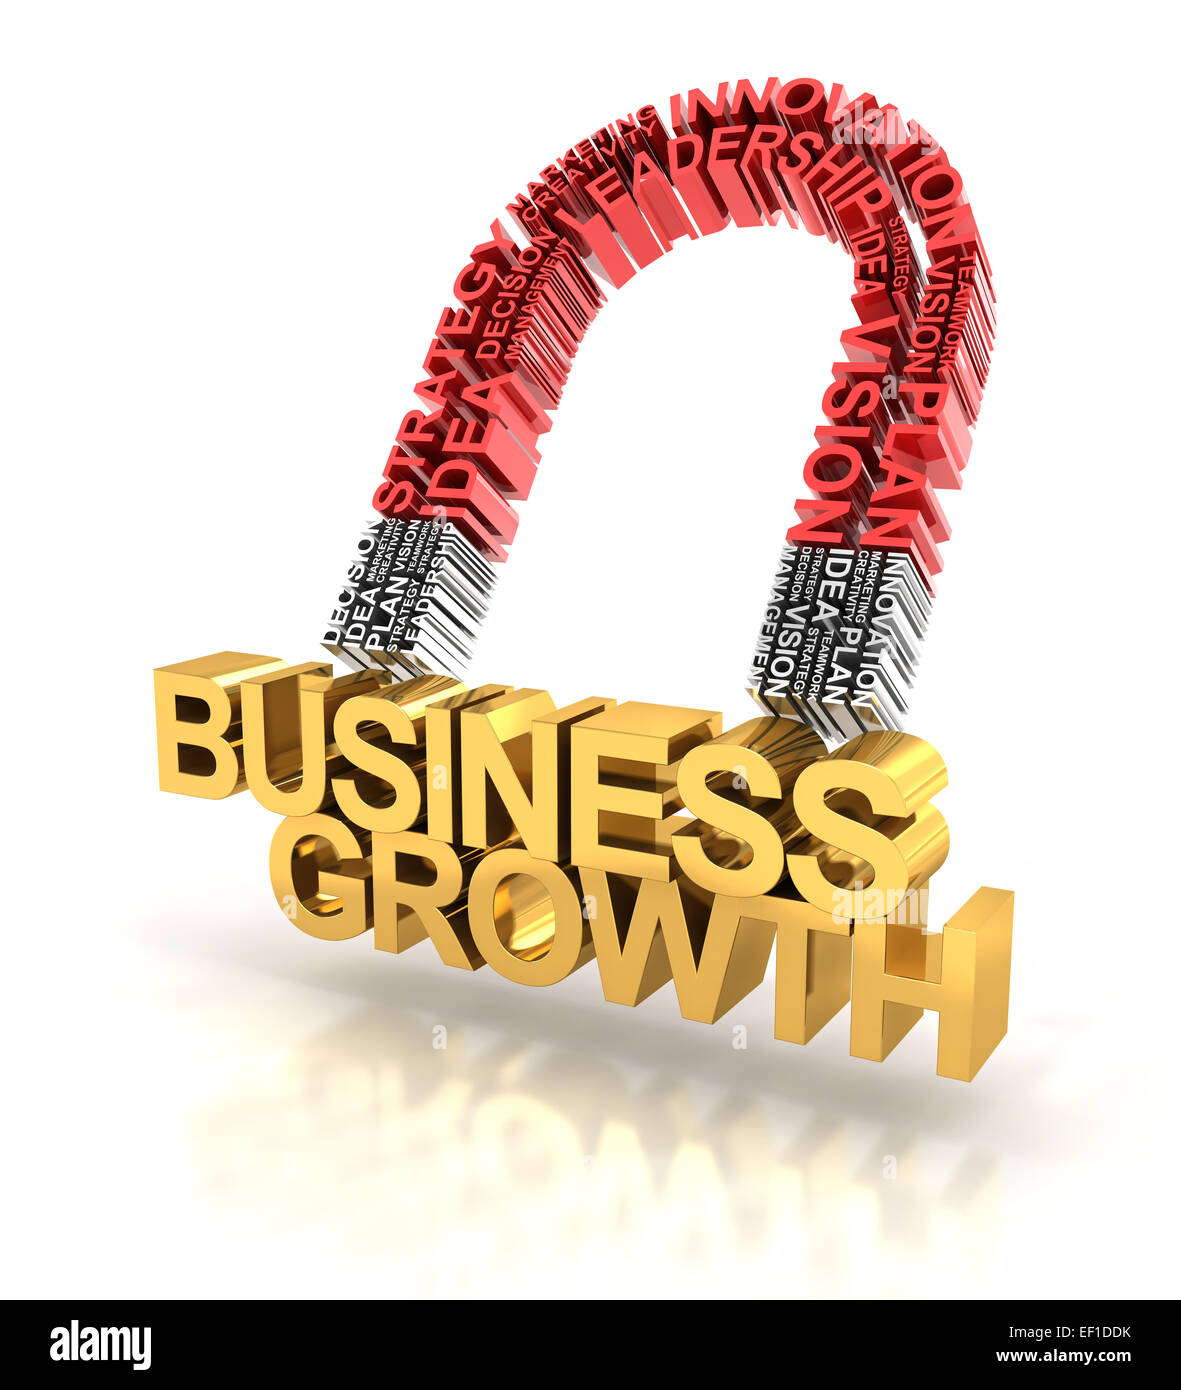 Magnet formed by business words attracting business growth Stock Photo